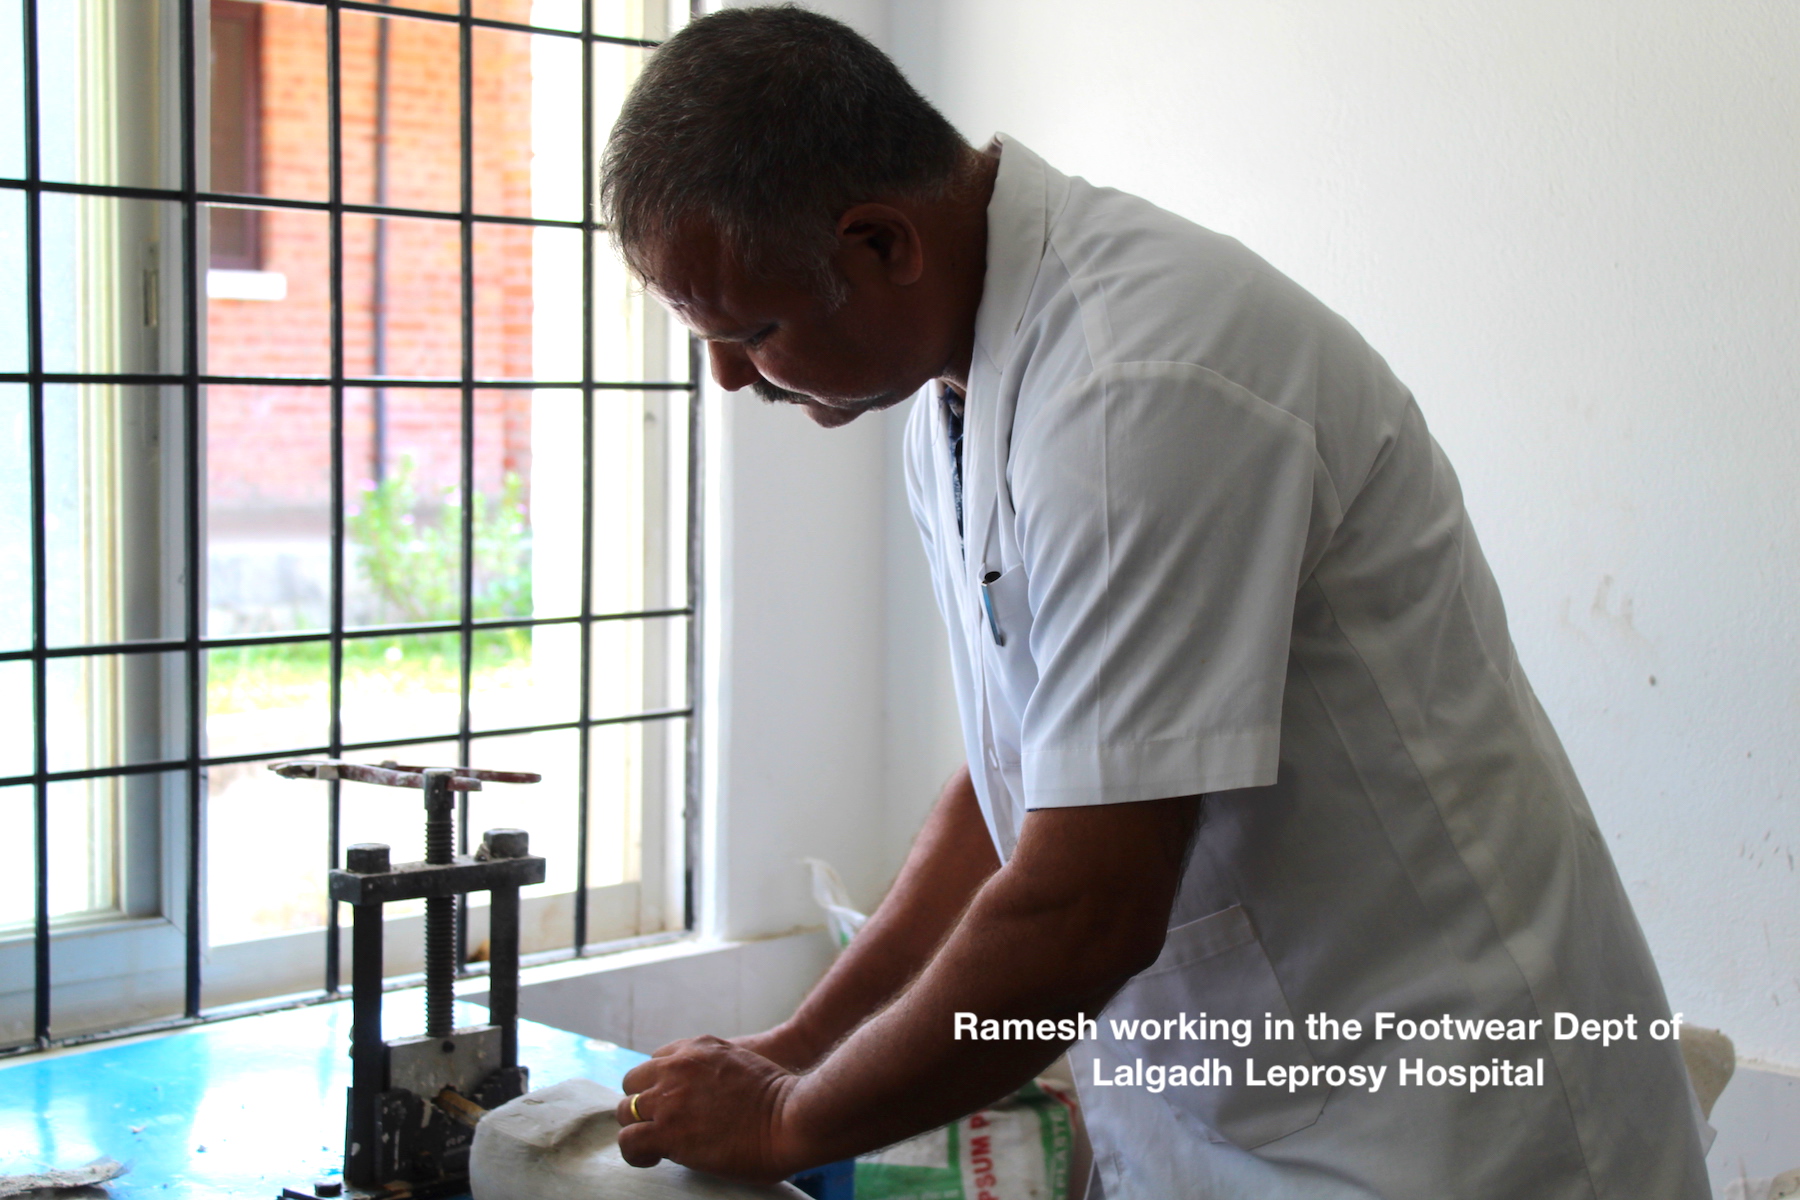 Man Ramesh working on machine in the footwear department at Lalgadh Leprosy Hospital and Services Centre